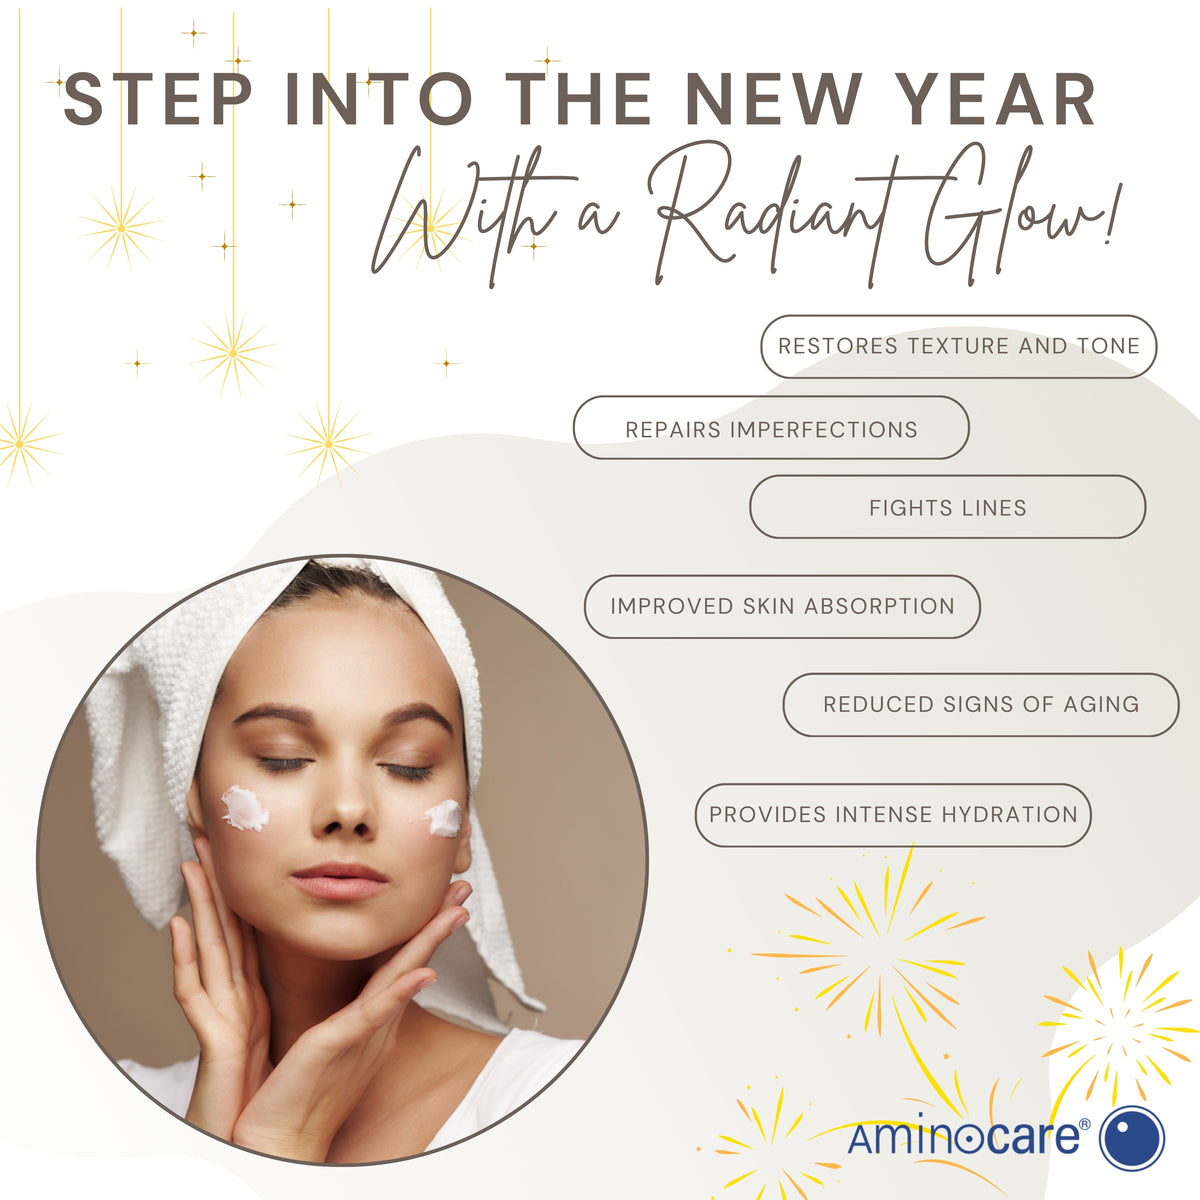 Step into the New Year with a Radiant Glow